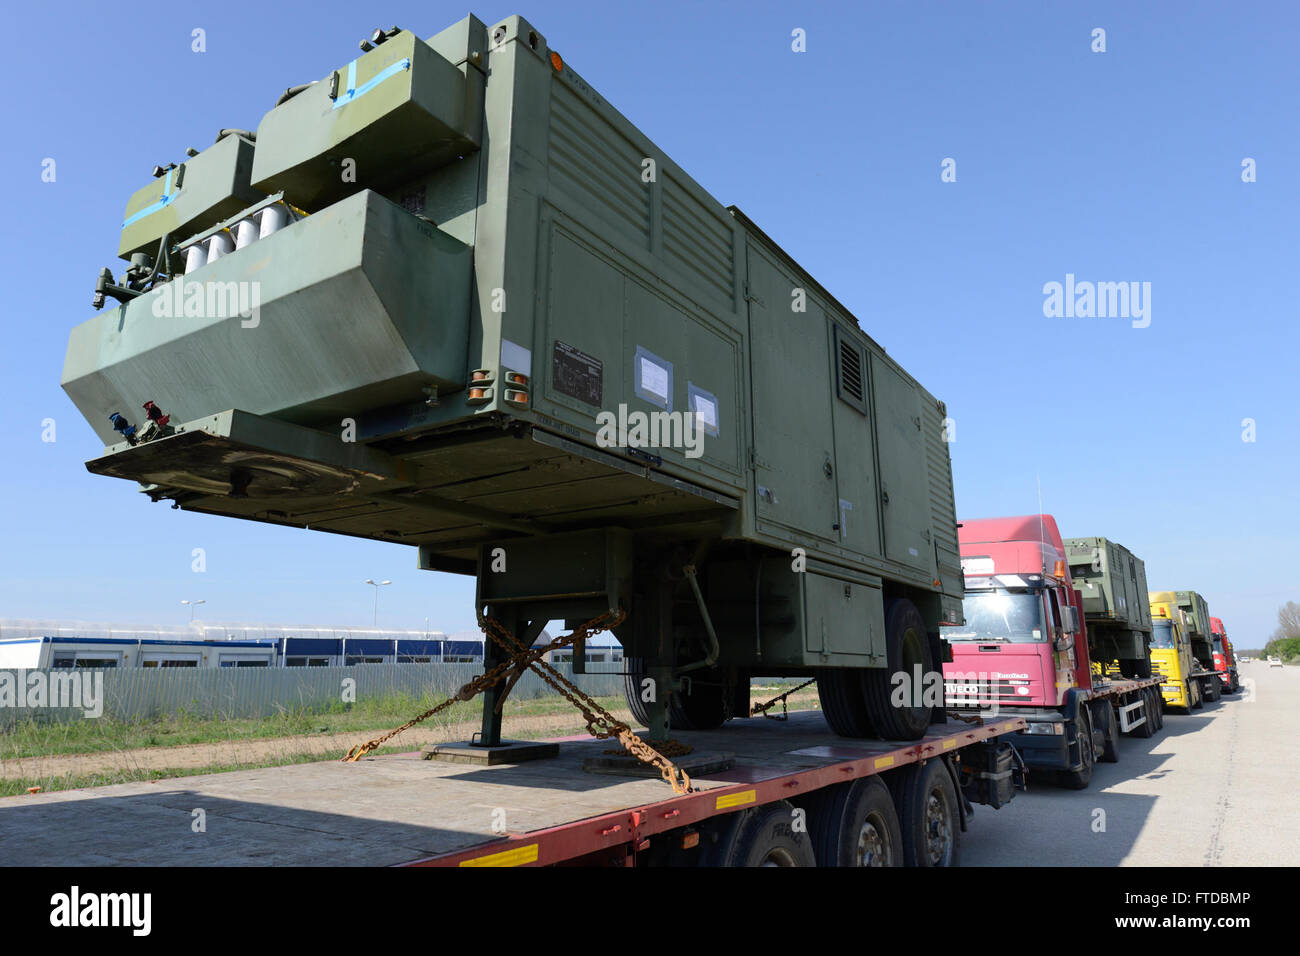 150418-N-TQ904-001 NAVAL SUPPORT FACILITY DEVESELU, Romania (April 18, 2015) A line of portable generators await installation at Naval Support Facility Deveselu, Romania, April 18, 2015. Members of the U.S. Army Corps of Engineers 249th Engineer Battalion transported the generators from Fort Belvoir, Virginia, and installed them into Deveselu’s Aegis Ashore facility. (U.S. Navy photo by Lt. Cmdr. Mike Billips/Released) Stock Photo